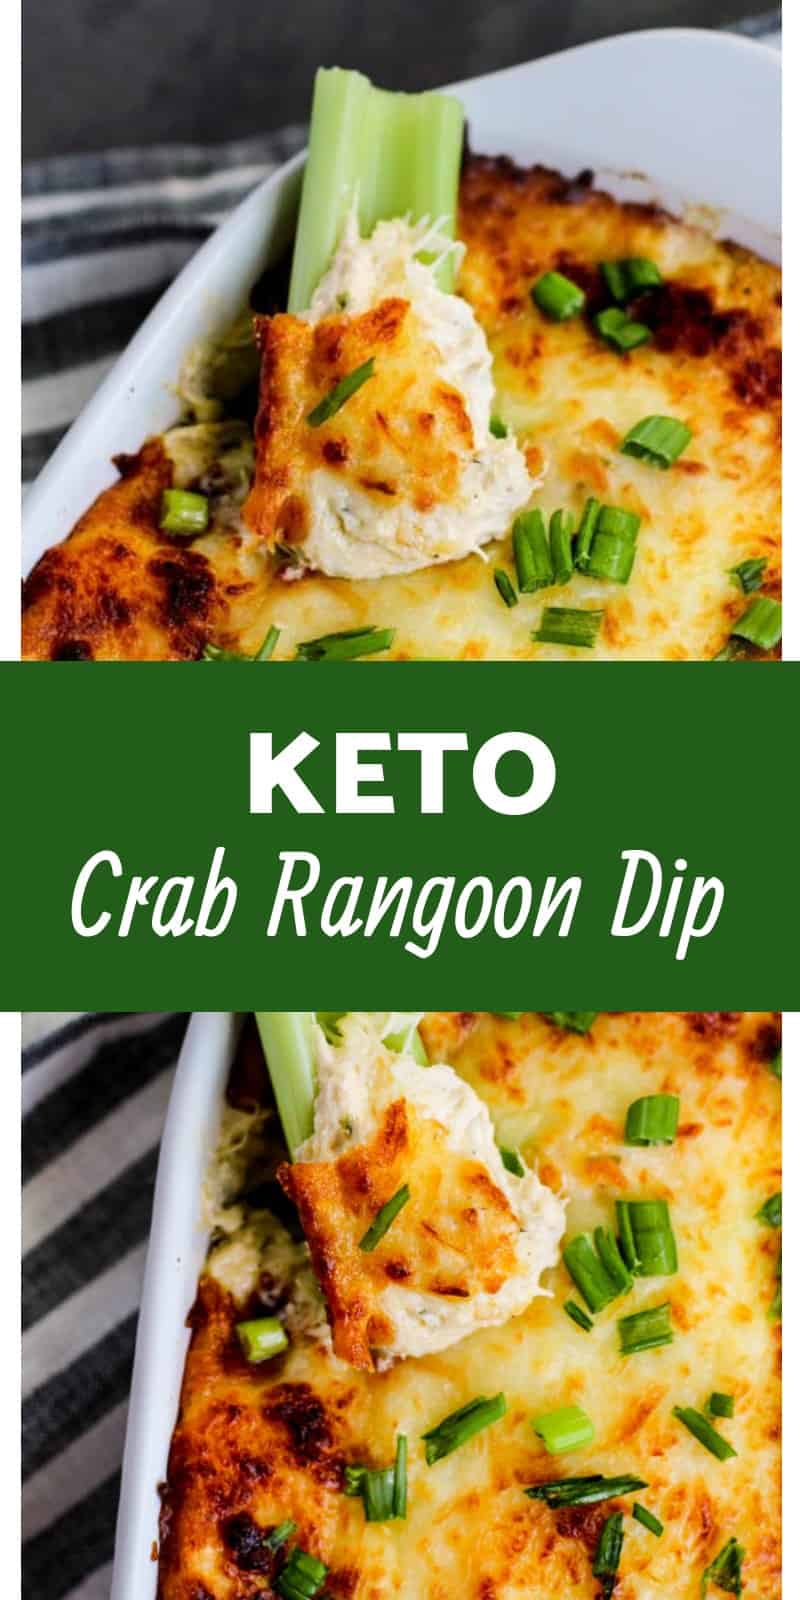 If you have a craving for a delicious hot crab dip, this low carb crab rangoon dip recipe is the perfect appetizer to take that craving away!